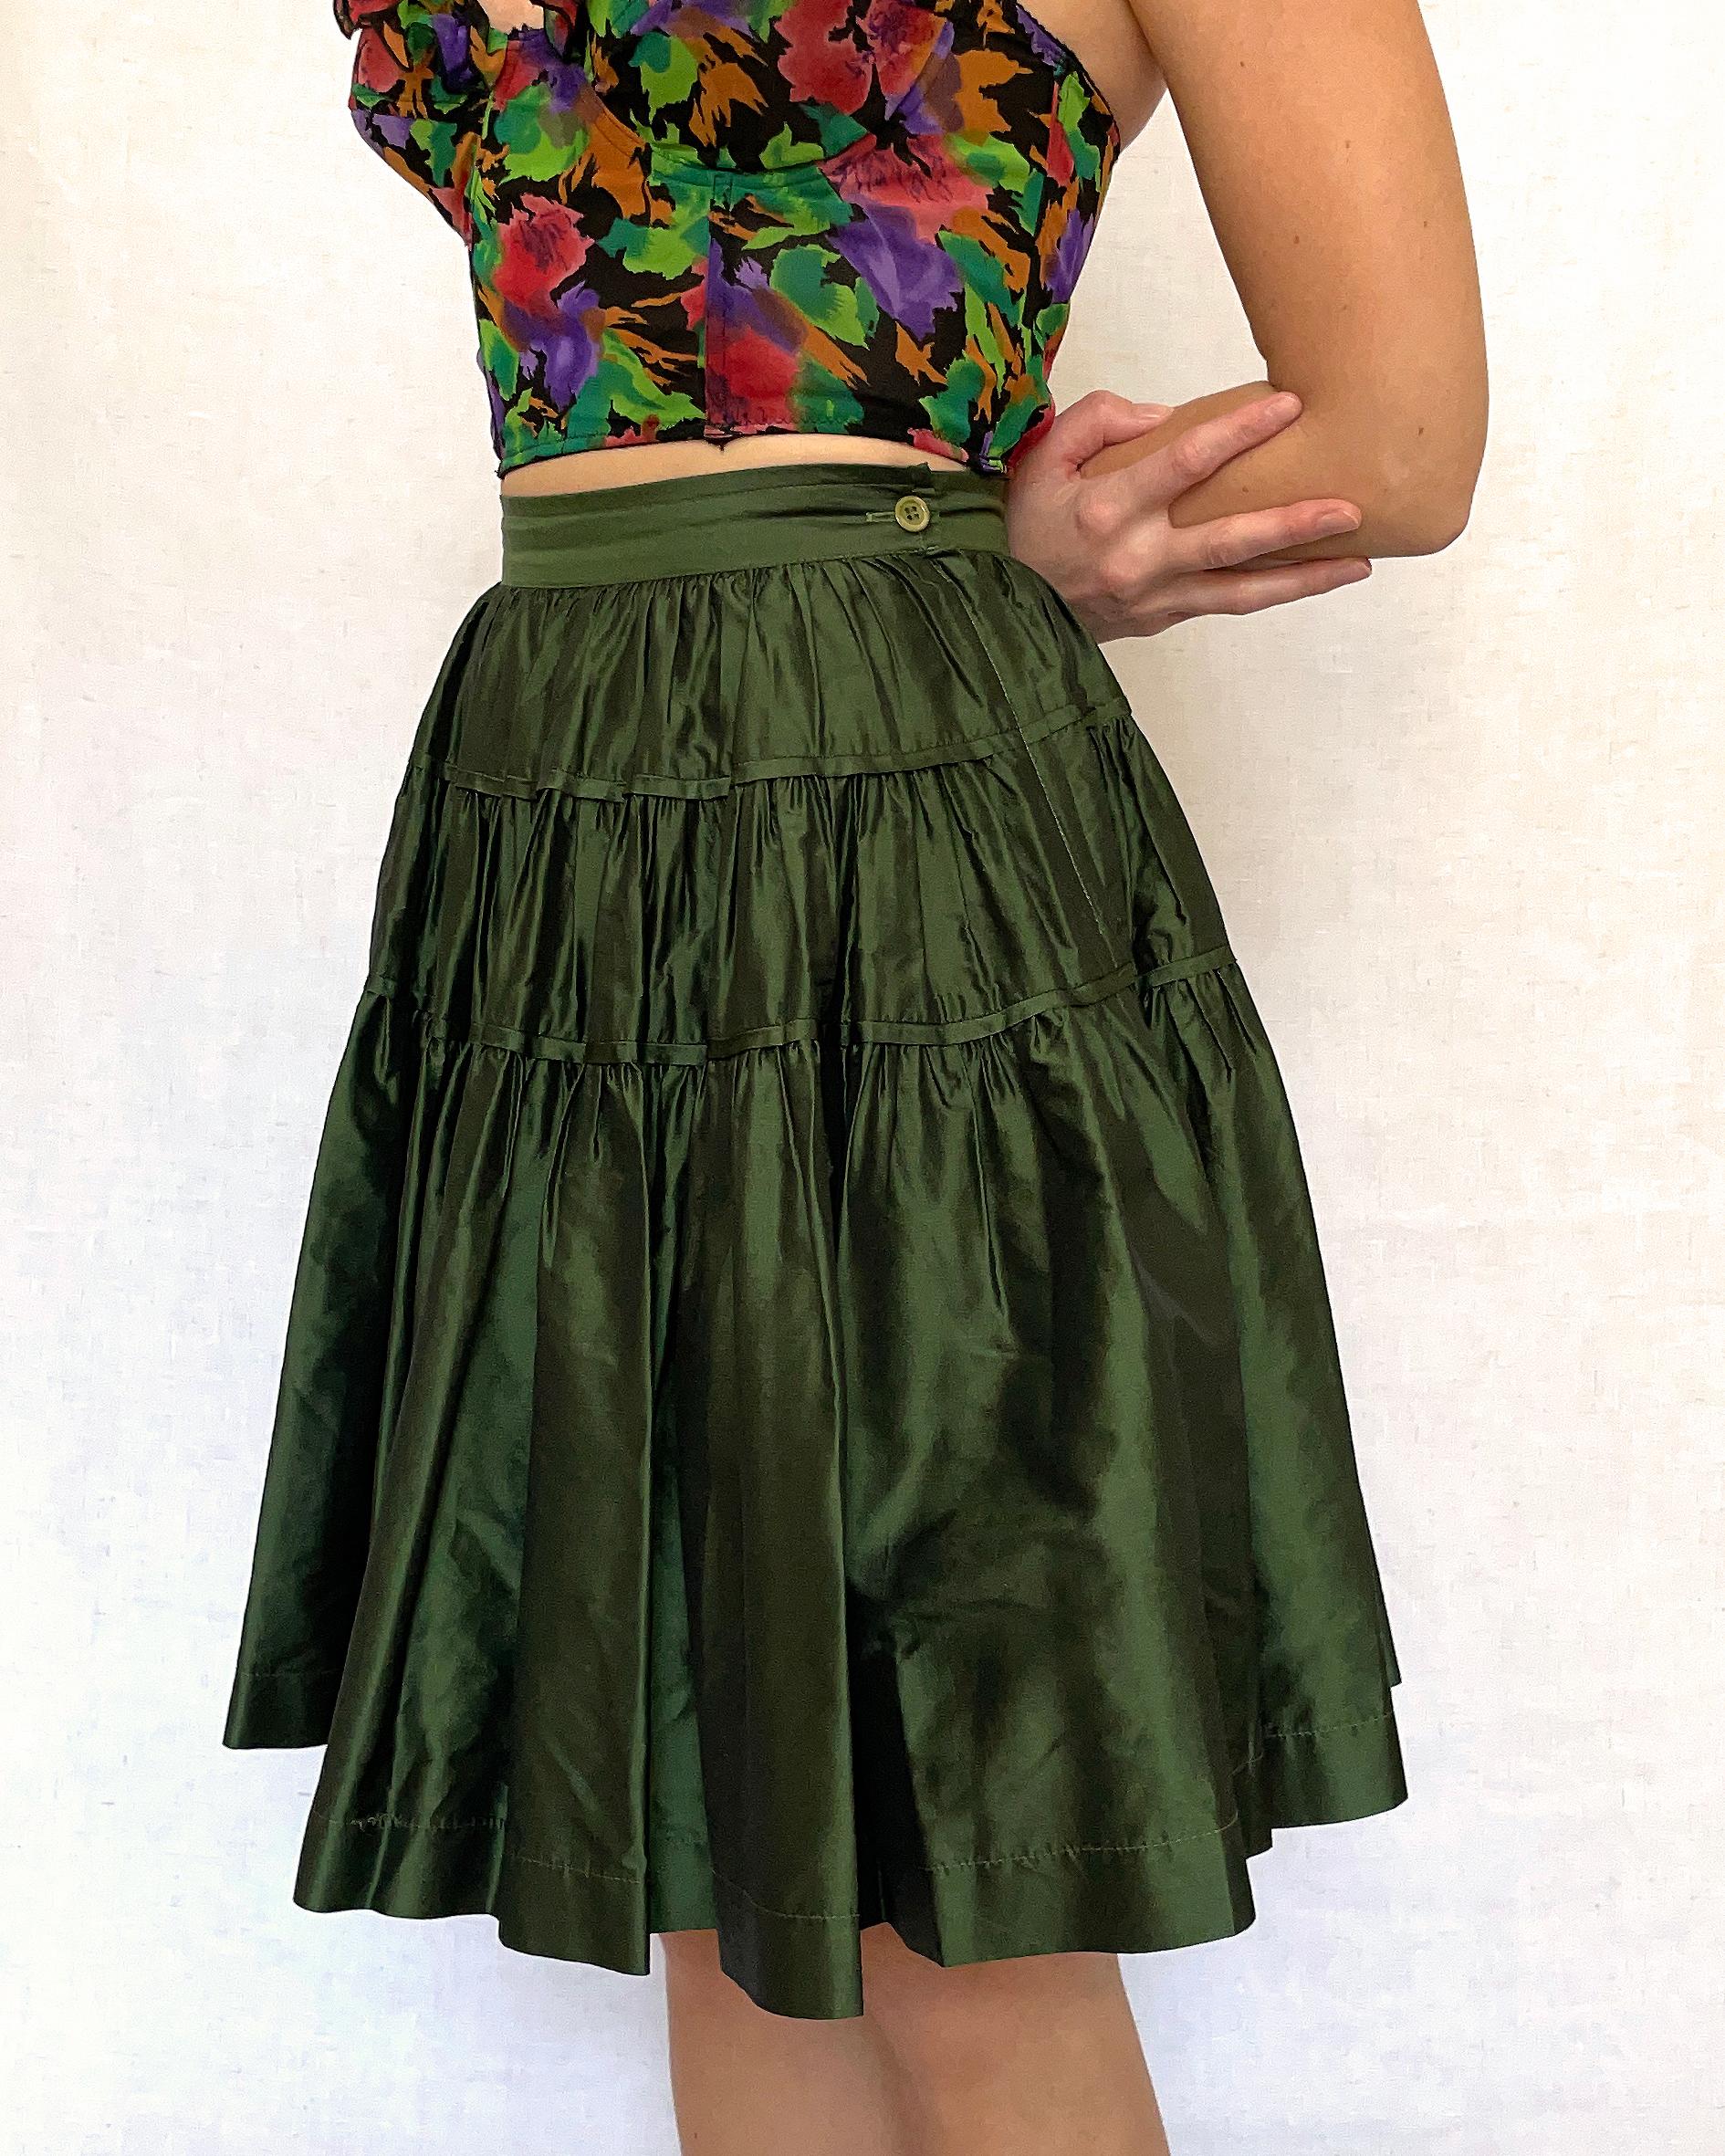 Vintage Kenzo Silk Taffeta Skirt: This skirt is a classic Kenzo silhouette, and a staple piece for any fashion collector. Made in France by Kenzo circa 1980s, it's constructed of 100% silk taffeta, with gathered tiers creating volume. There is a lot